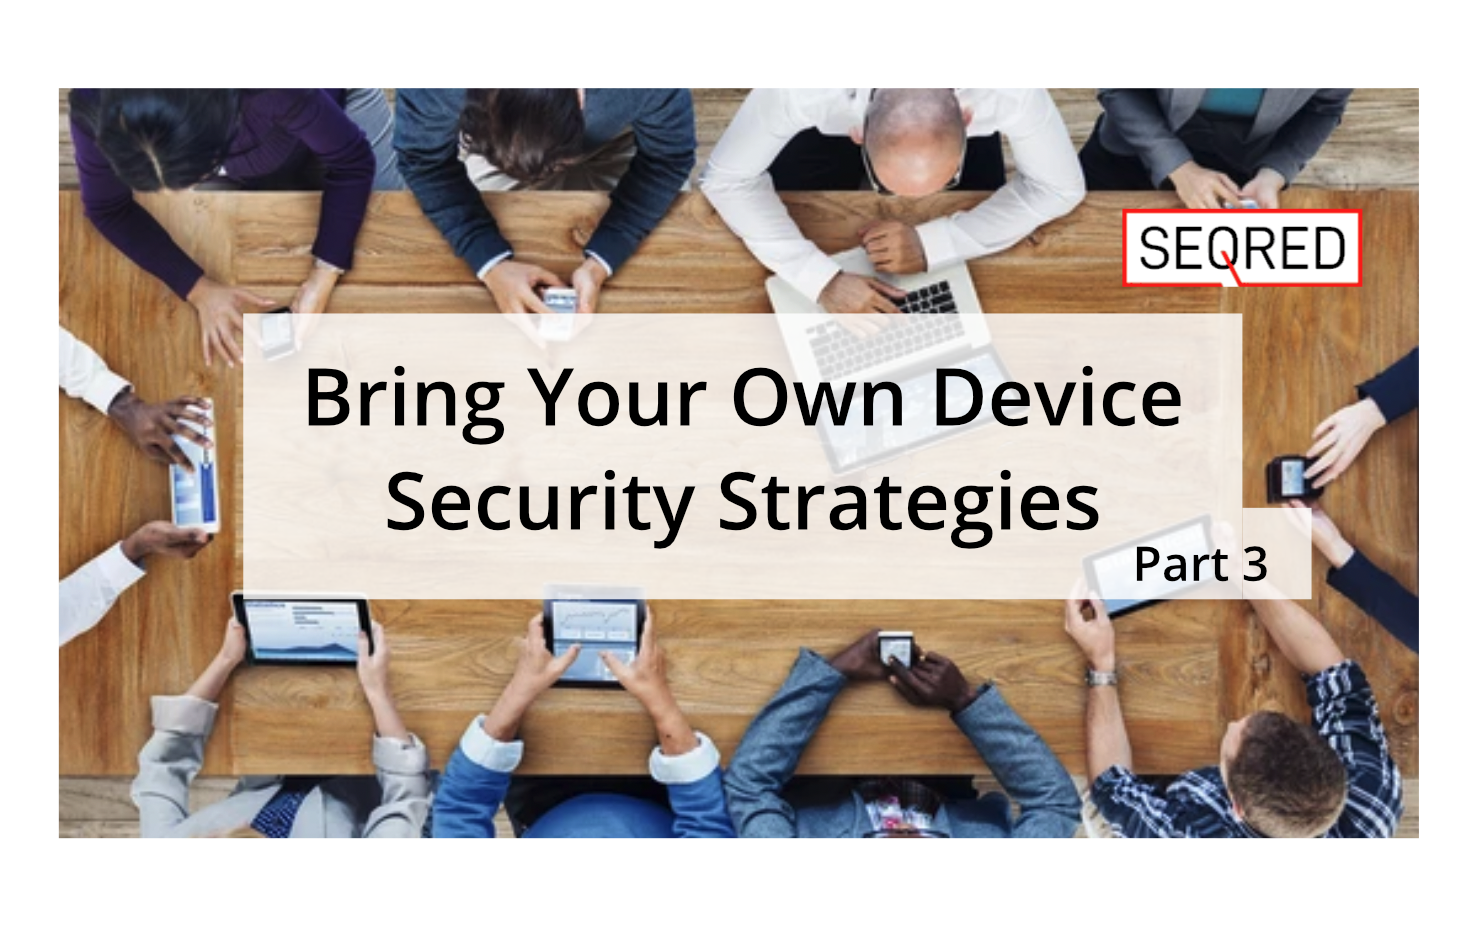 Bring Your Own Device Security Strategies